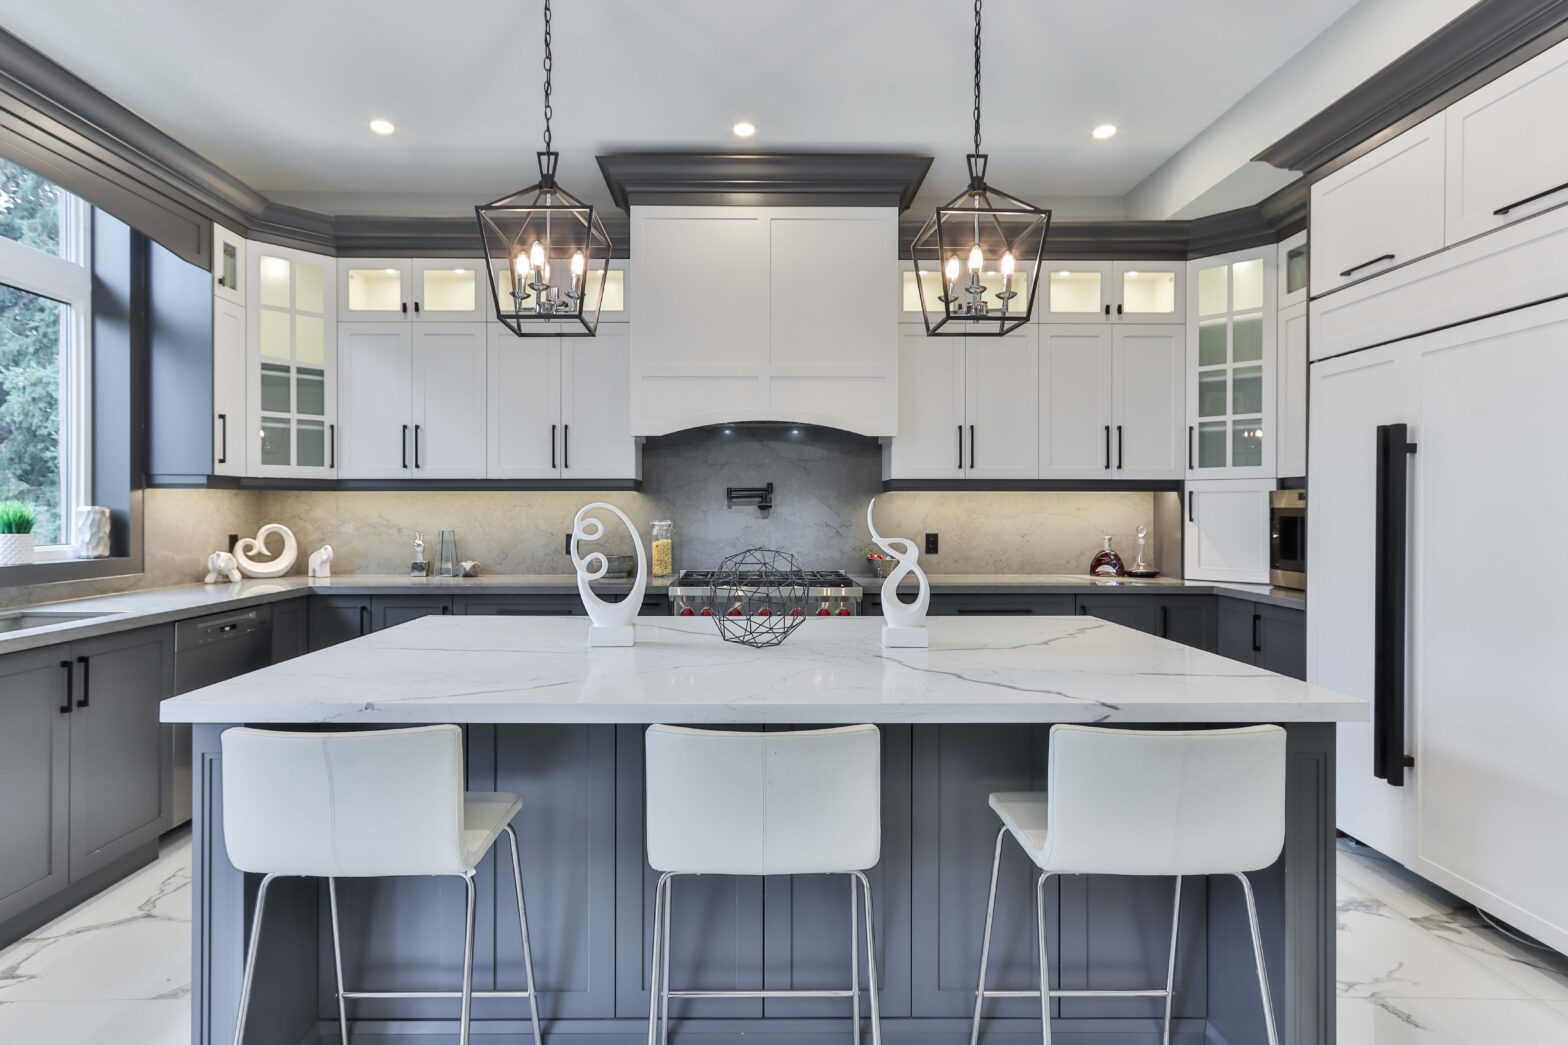 It's important to count up your kitchen remodel cost before the cabinet hardware and labor costs overwhelm you - get an accurate estimation from RUPP Family Builders today!